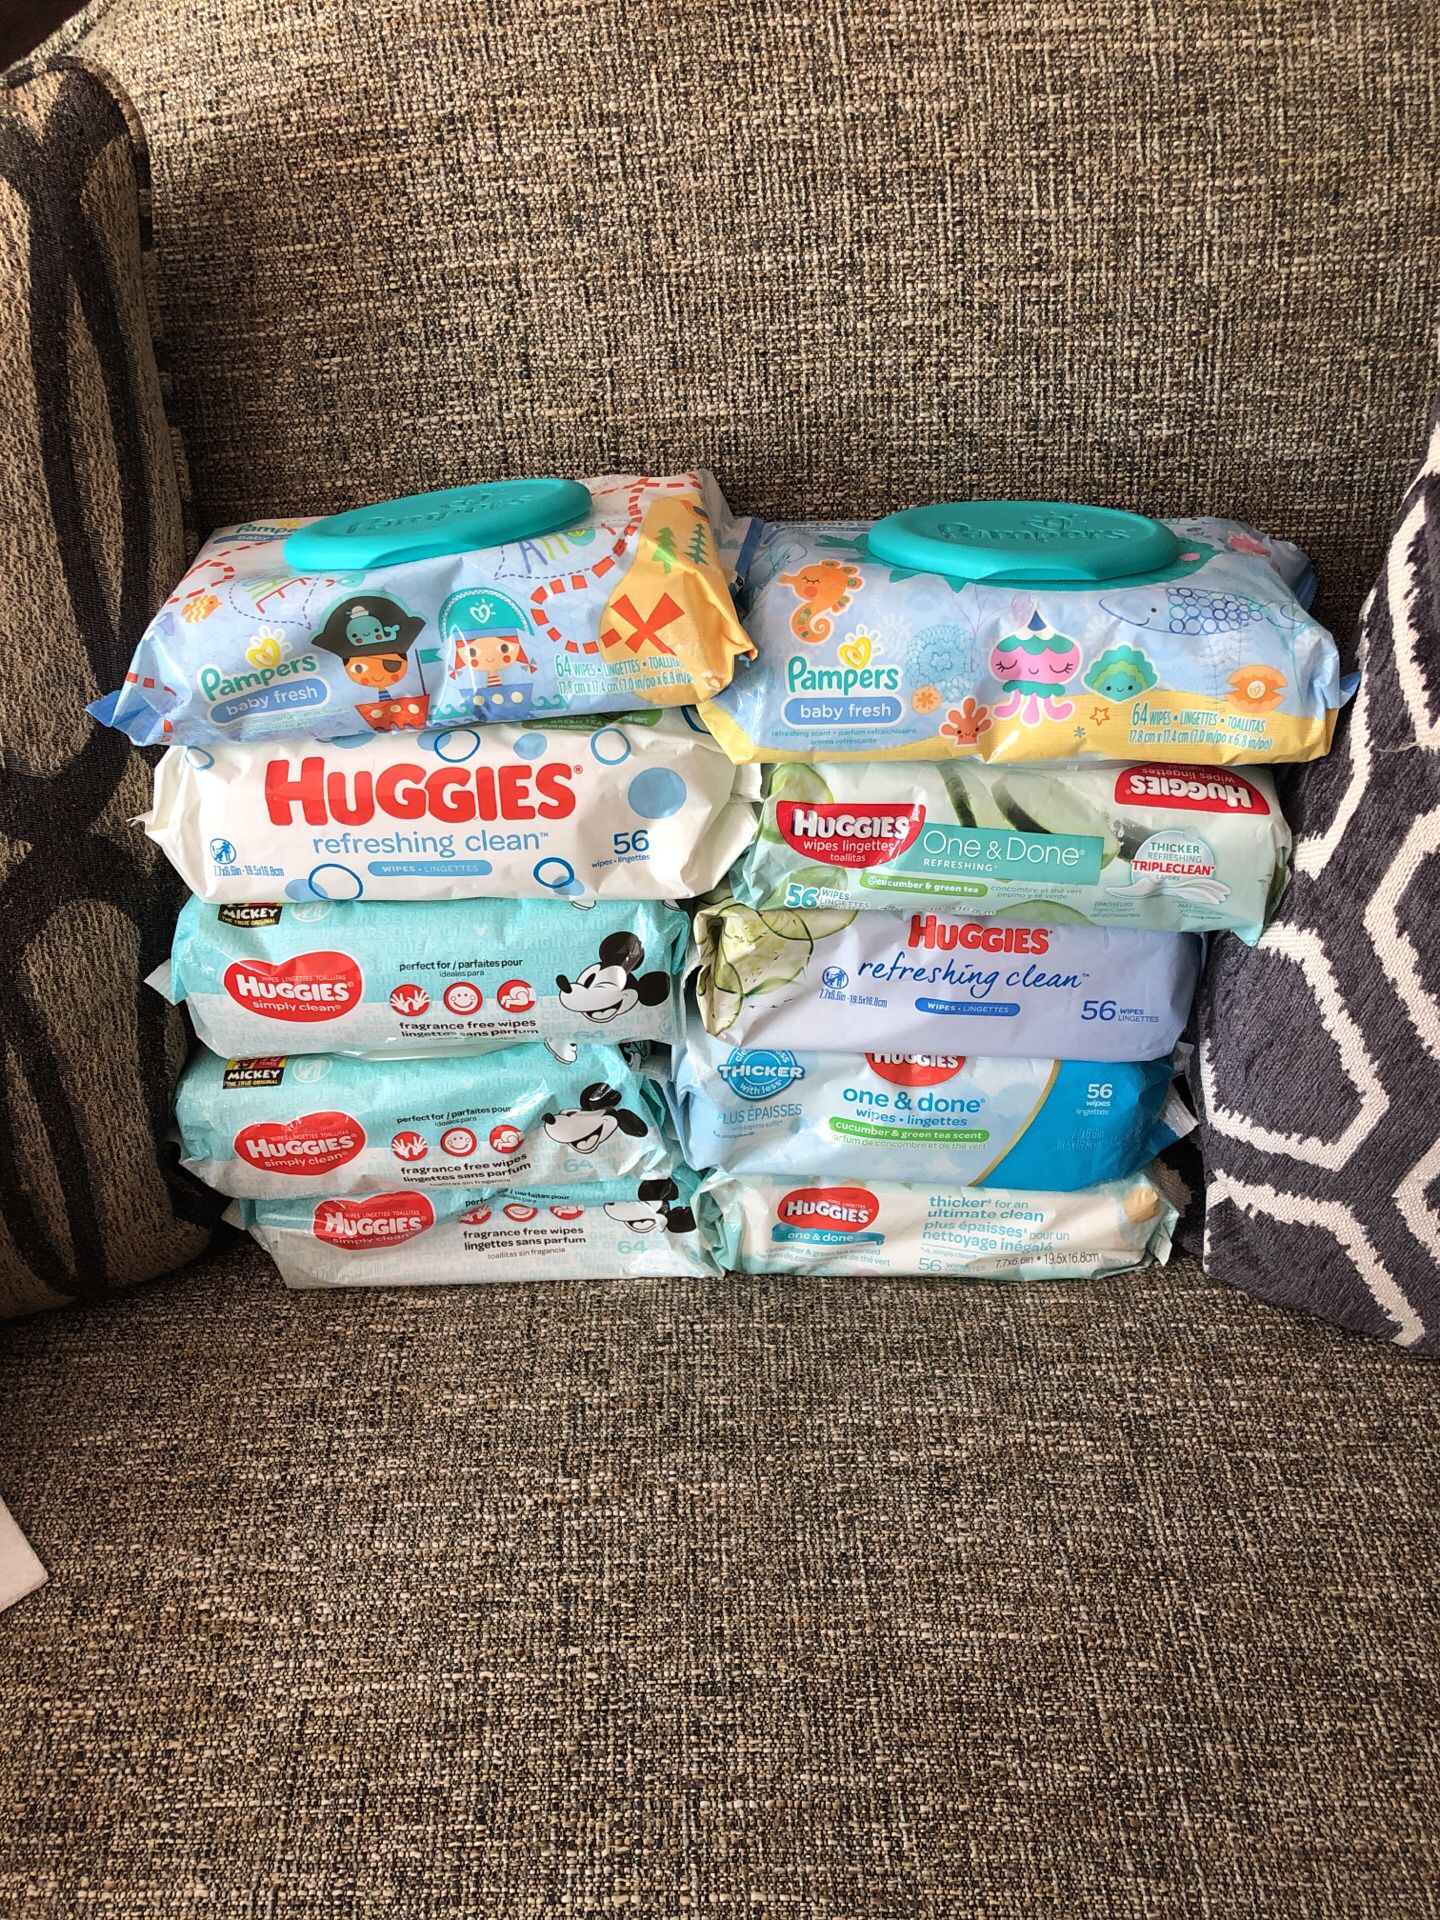 Not available Huggies & Pampers wipes& Please see all the pictures and the y